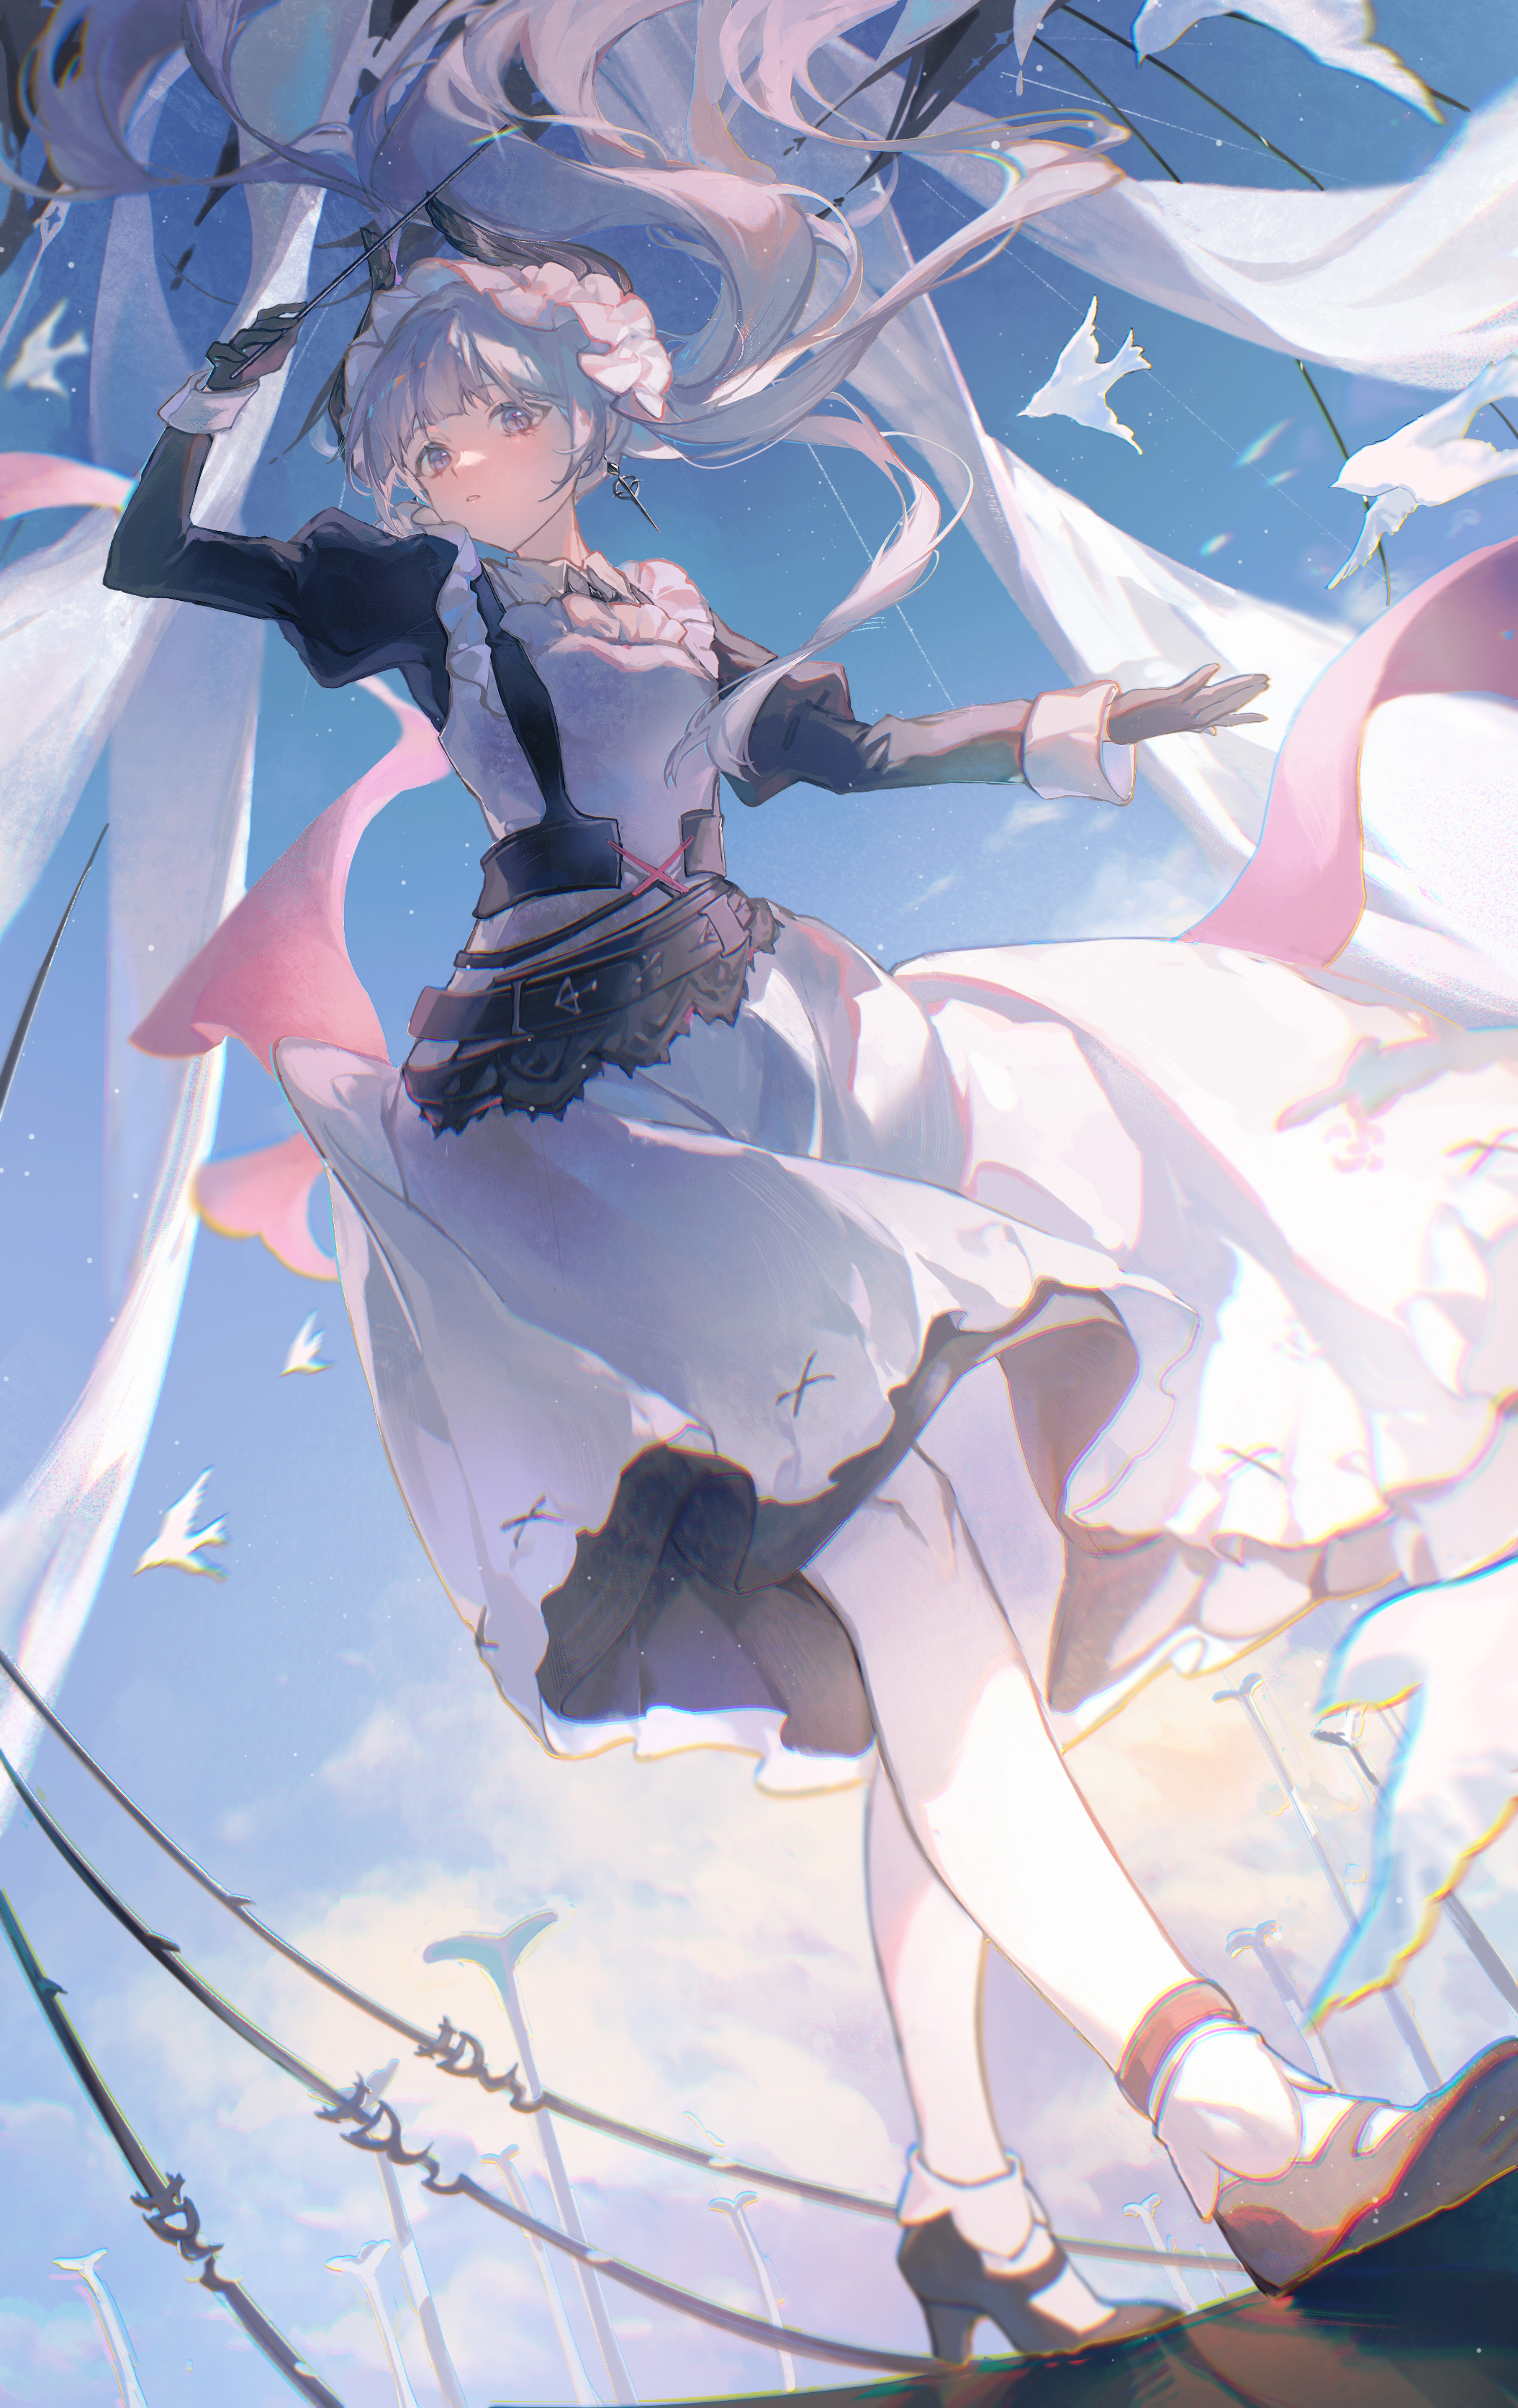 Arknights Irene Arknights Maid Outfit Walking Maid Worms Eye View Birds Hair Blowing In The Wind Gra 2109x3346